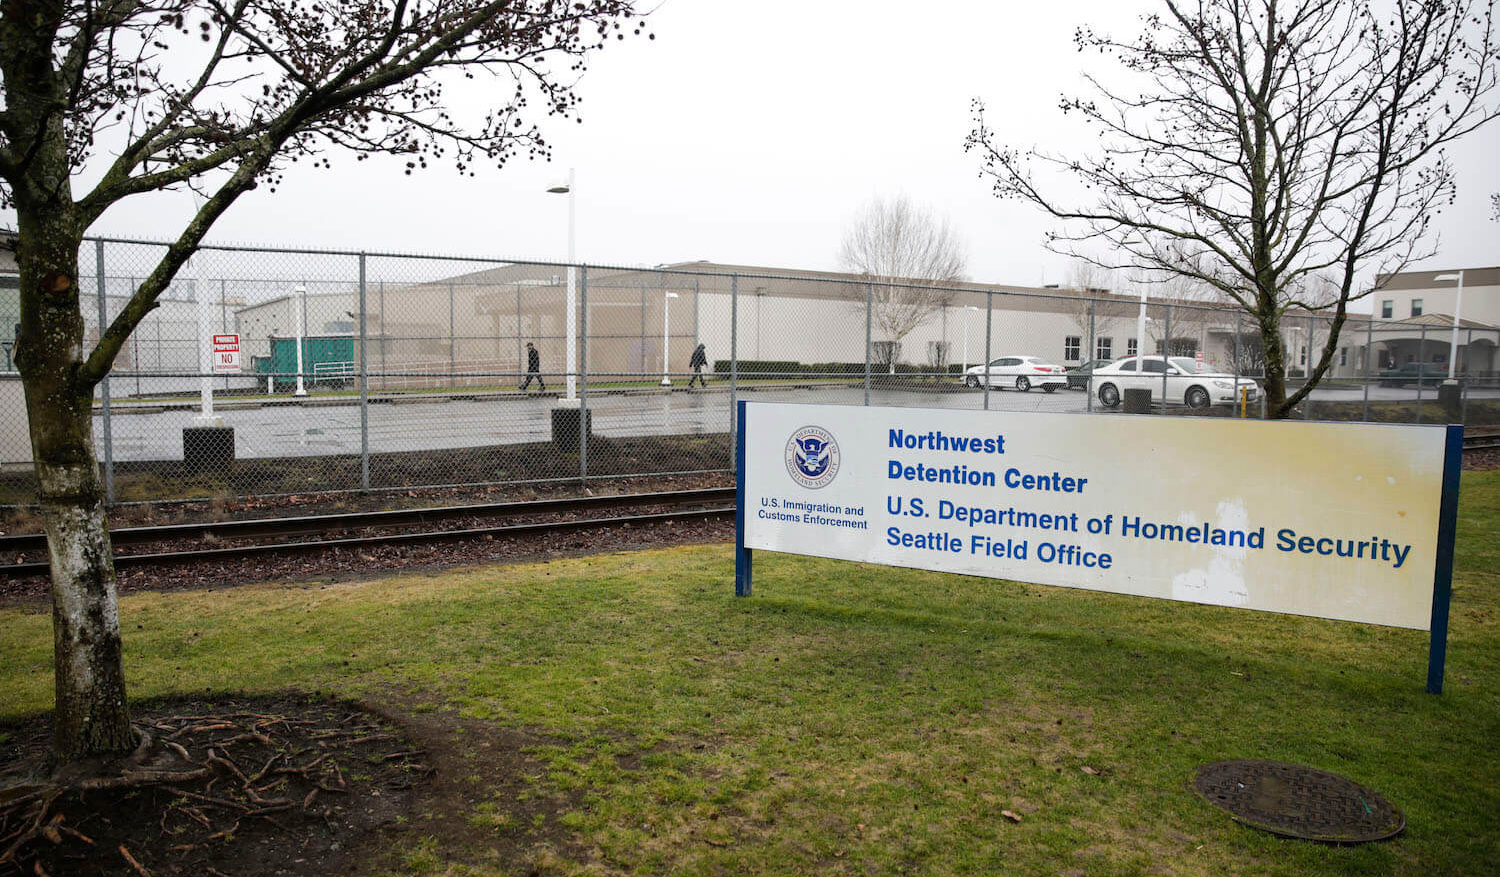 The U.S. Department of Homeland Security Northwest Detention Center is pictured in Tacoma, Washington on February 26, 2017. August 2021